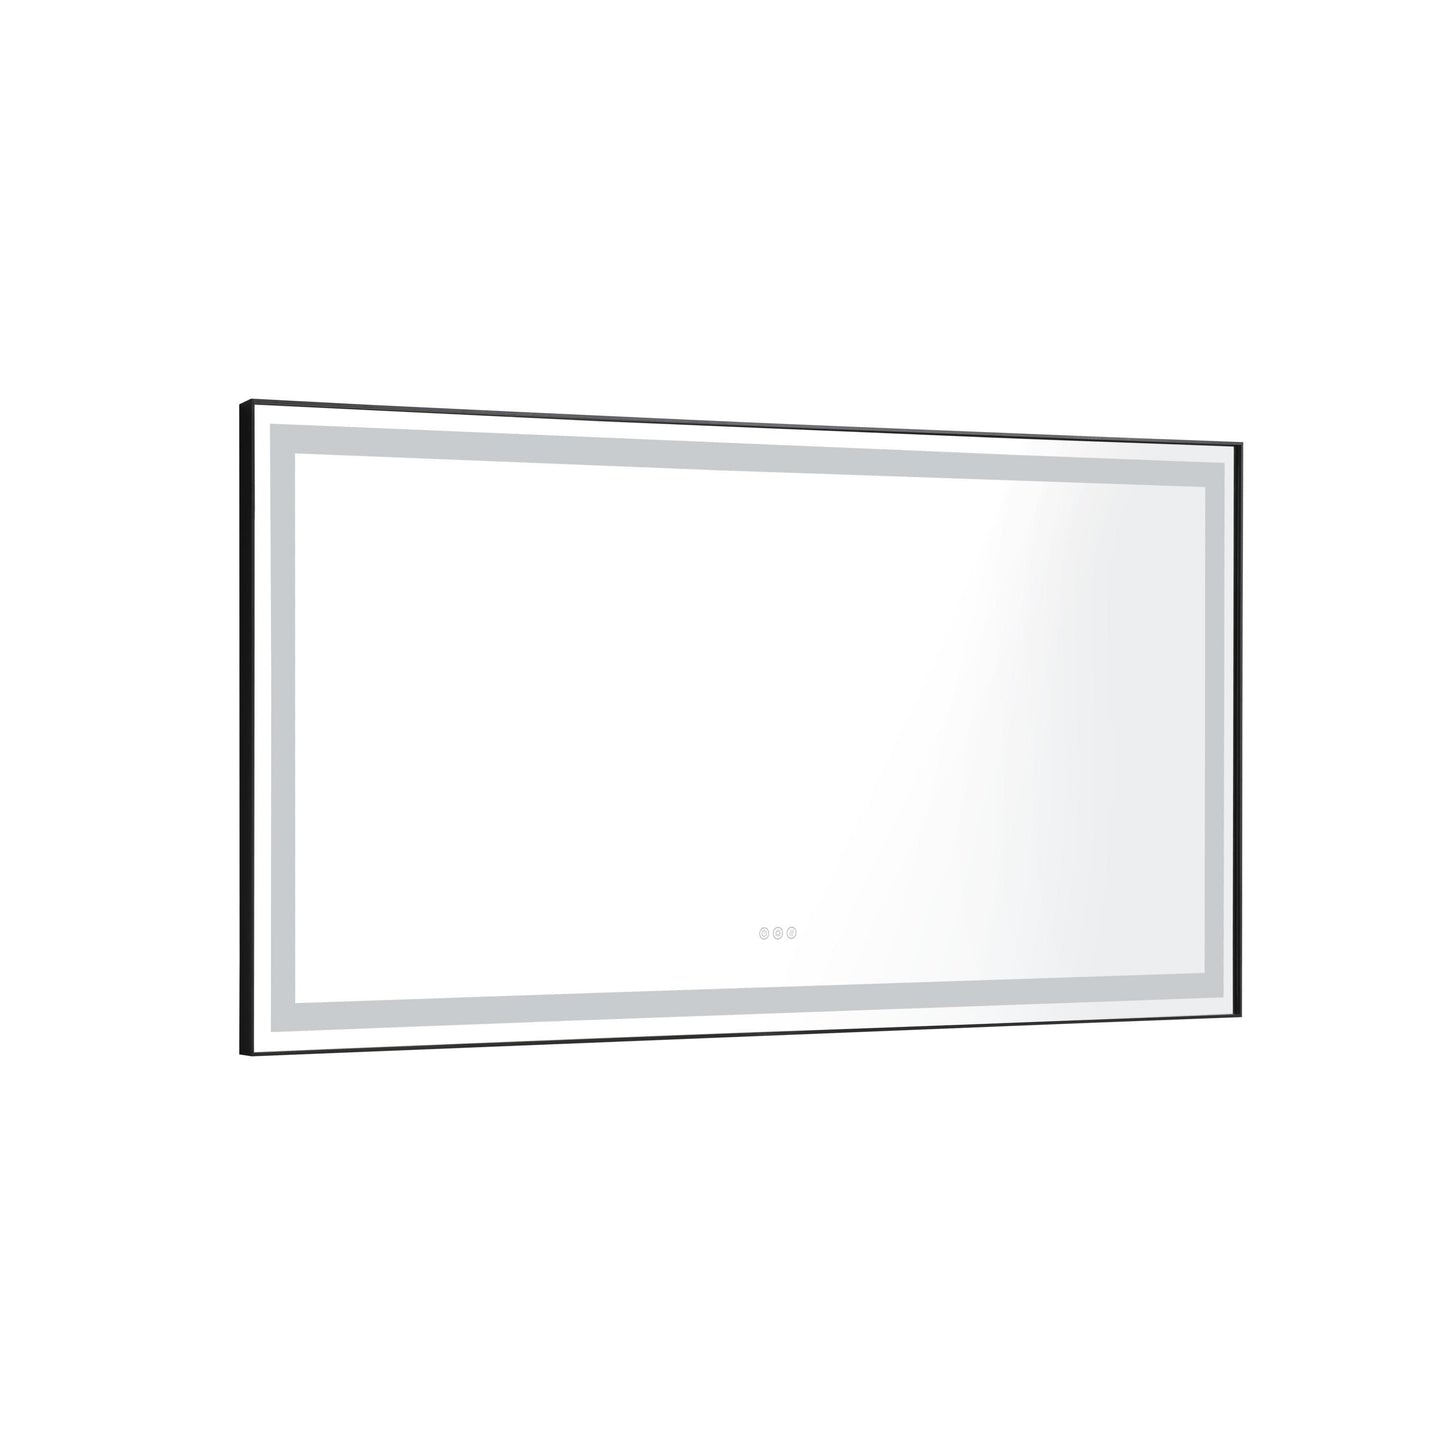 84*36 LED Lighted Bathroom Wall Mounted Mirror with High Lumen+Anti-Fog Separately Control

bedroom full-length mirror  bathroom led mirror  hair salon mirror